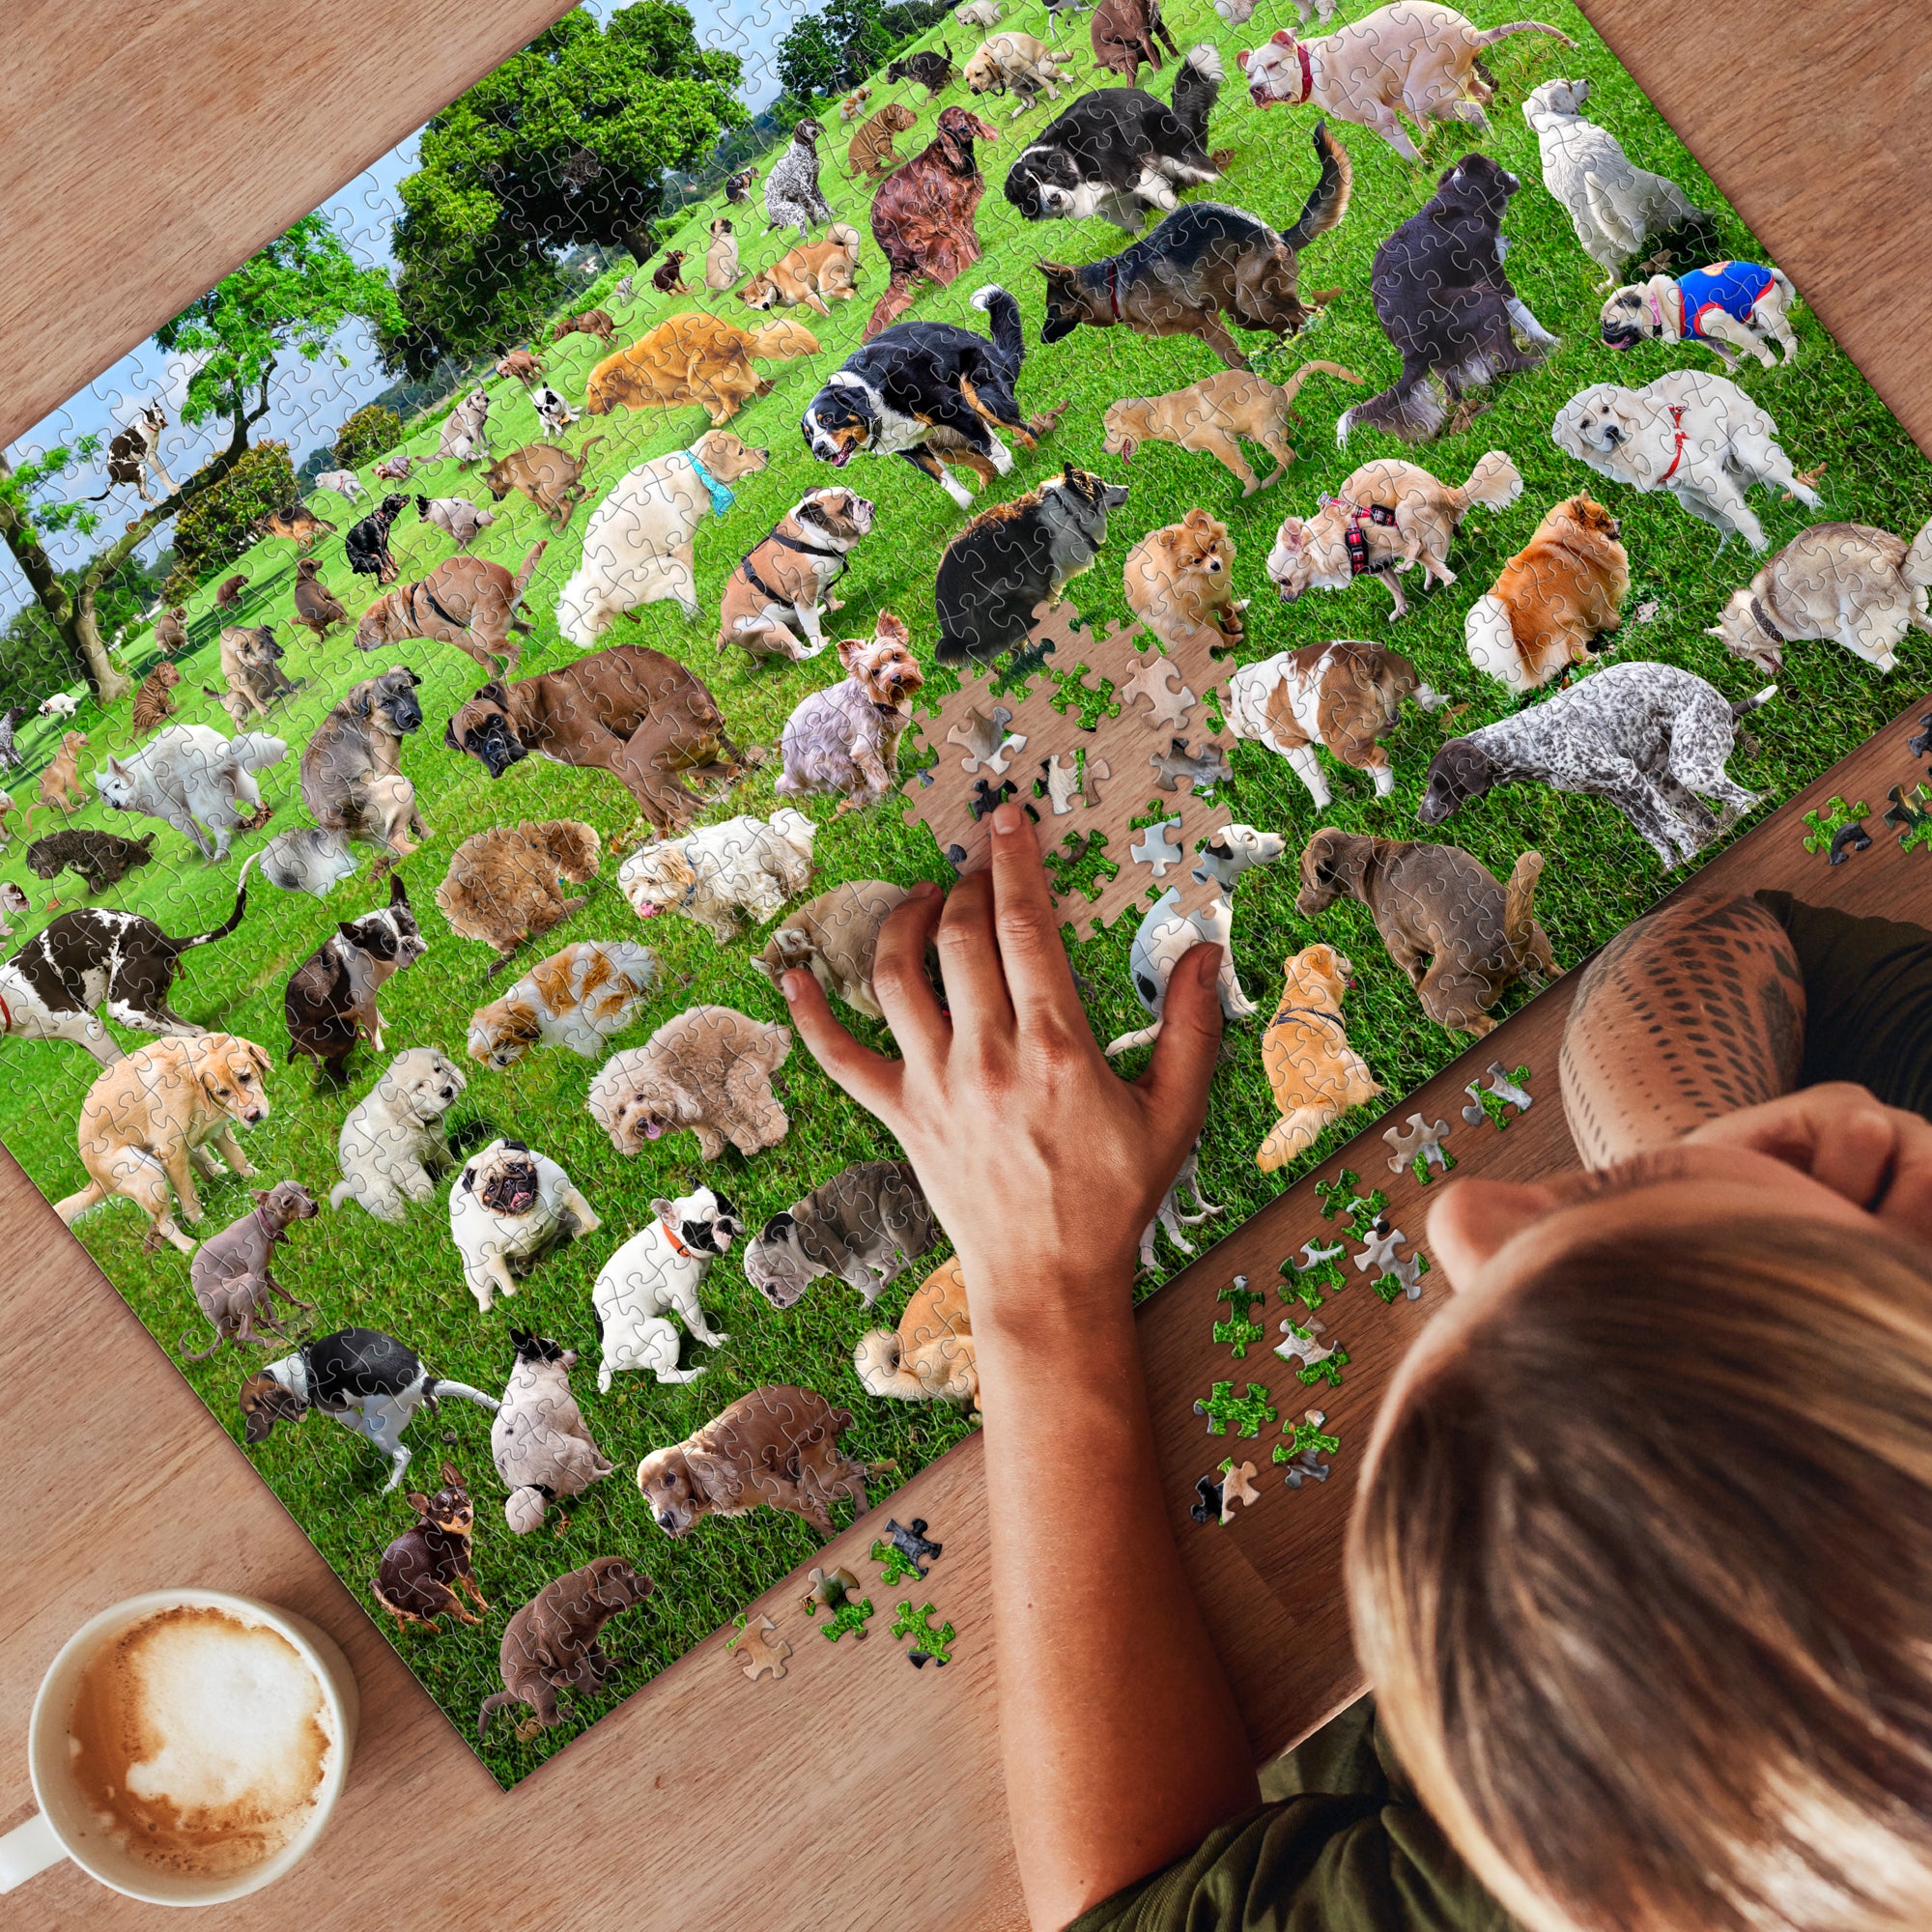 101 Pooping Puppies 1000 Piece Puzzle